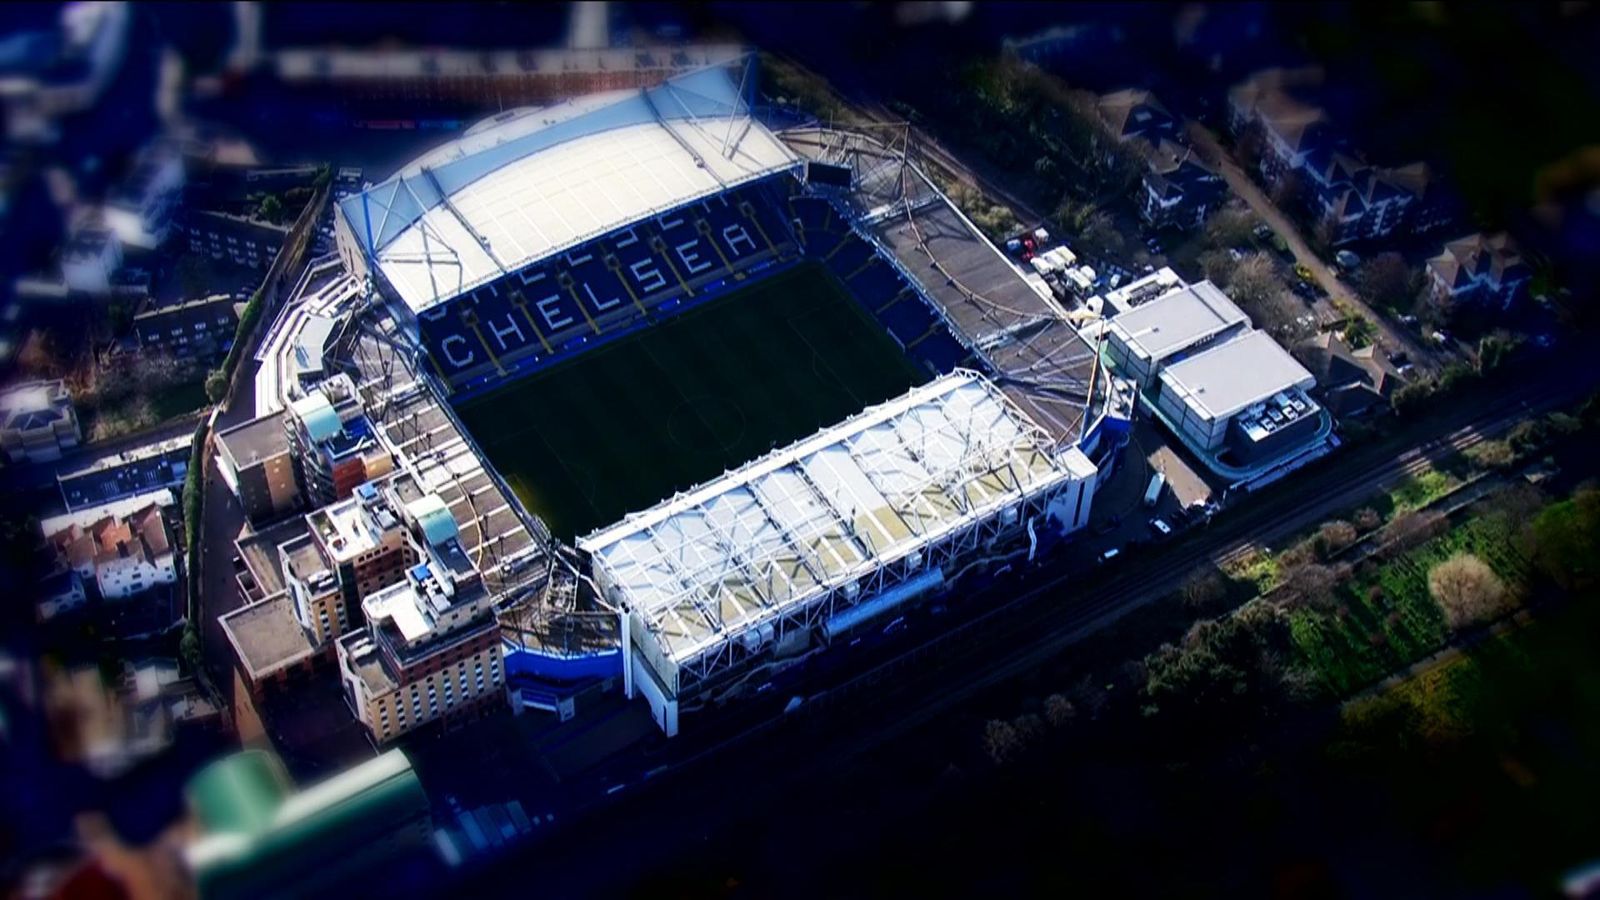 Chelsea FC sale: Dividend ban and debt limits feature in 'anti-Glazer' takeover deal